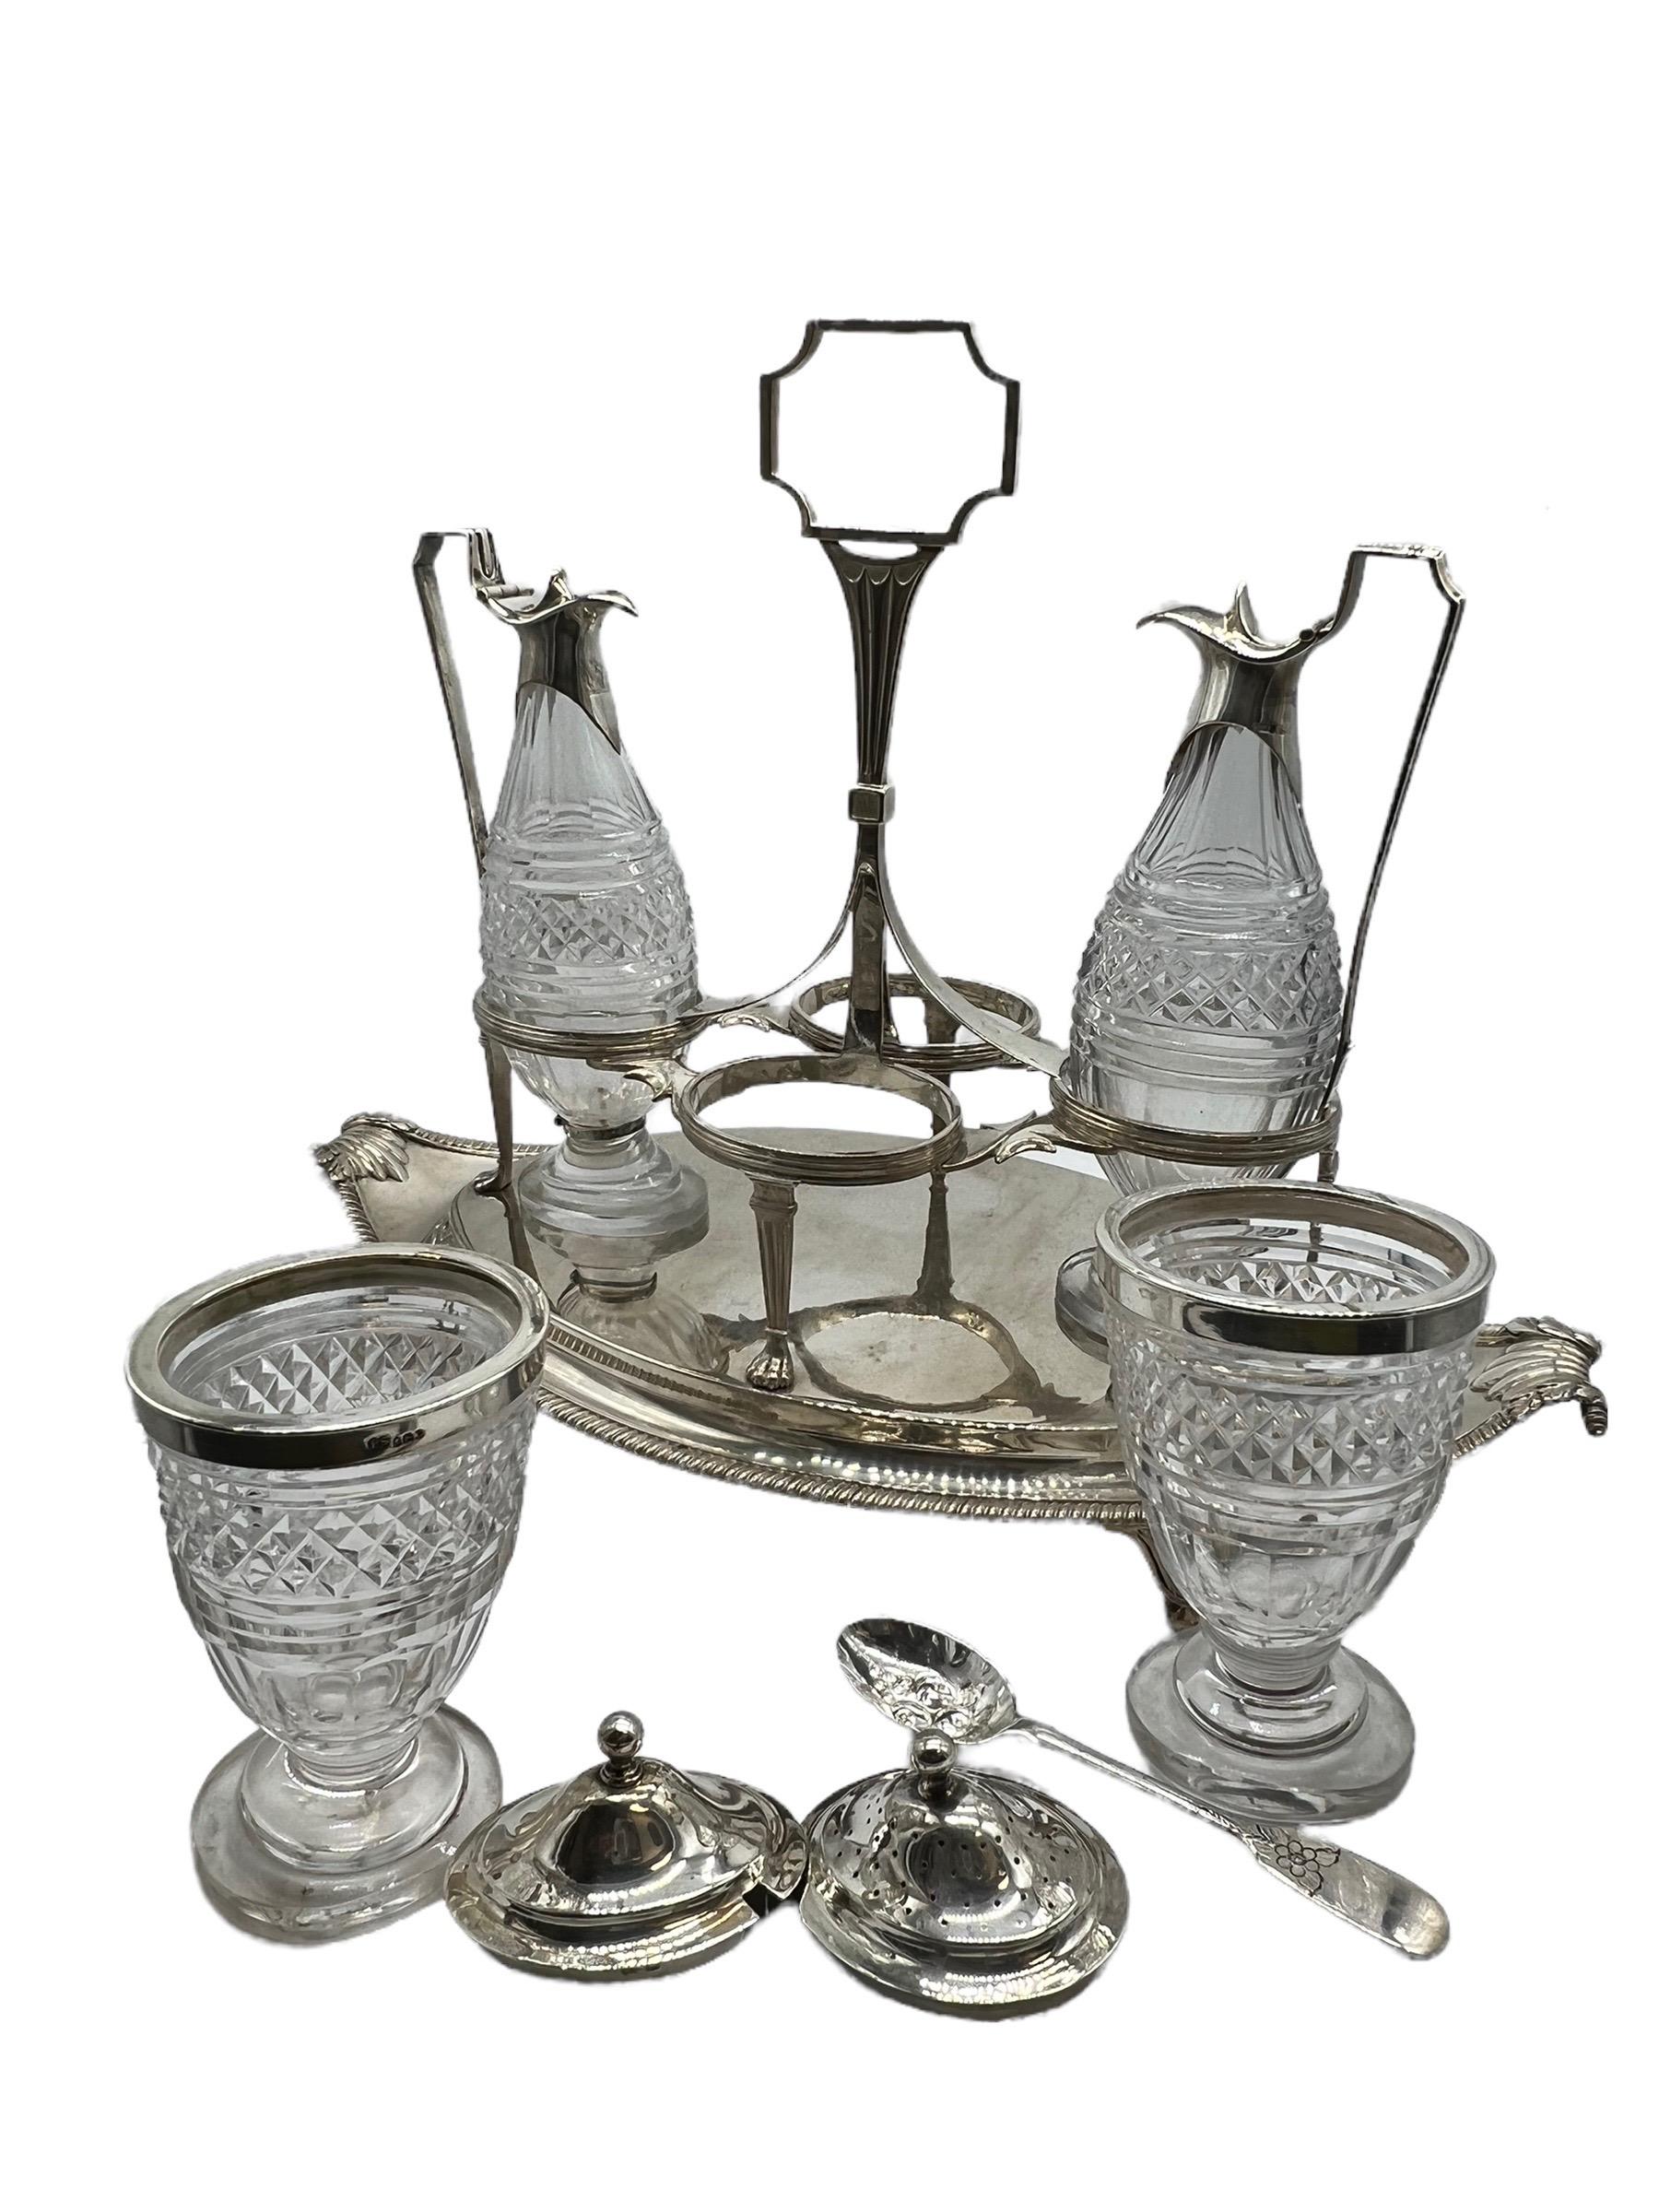 Sterling Silver and Cut-Glass Cruet Set by Paul Storr, Early 1800s In Fair Condition For Sale In North Miami, FL